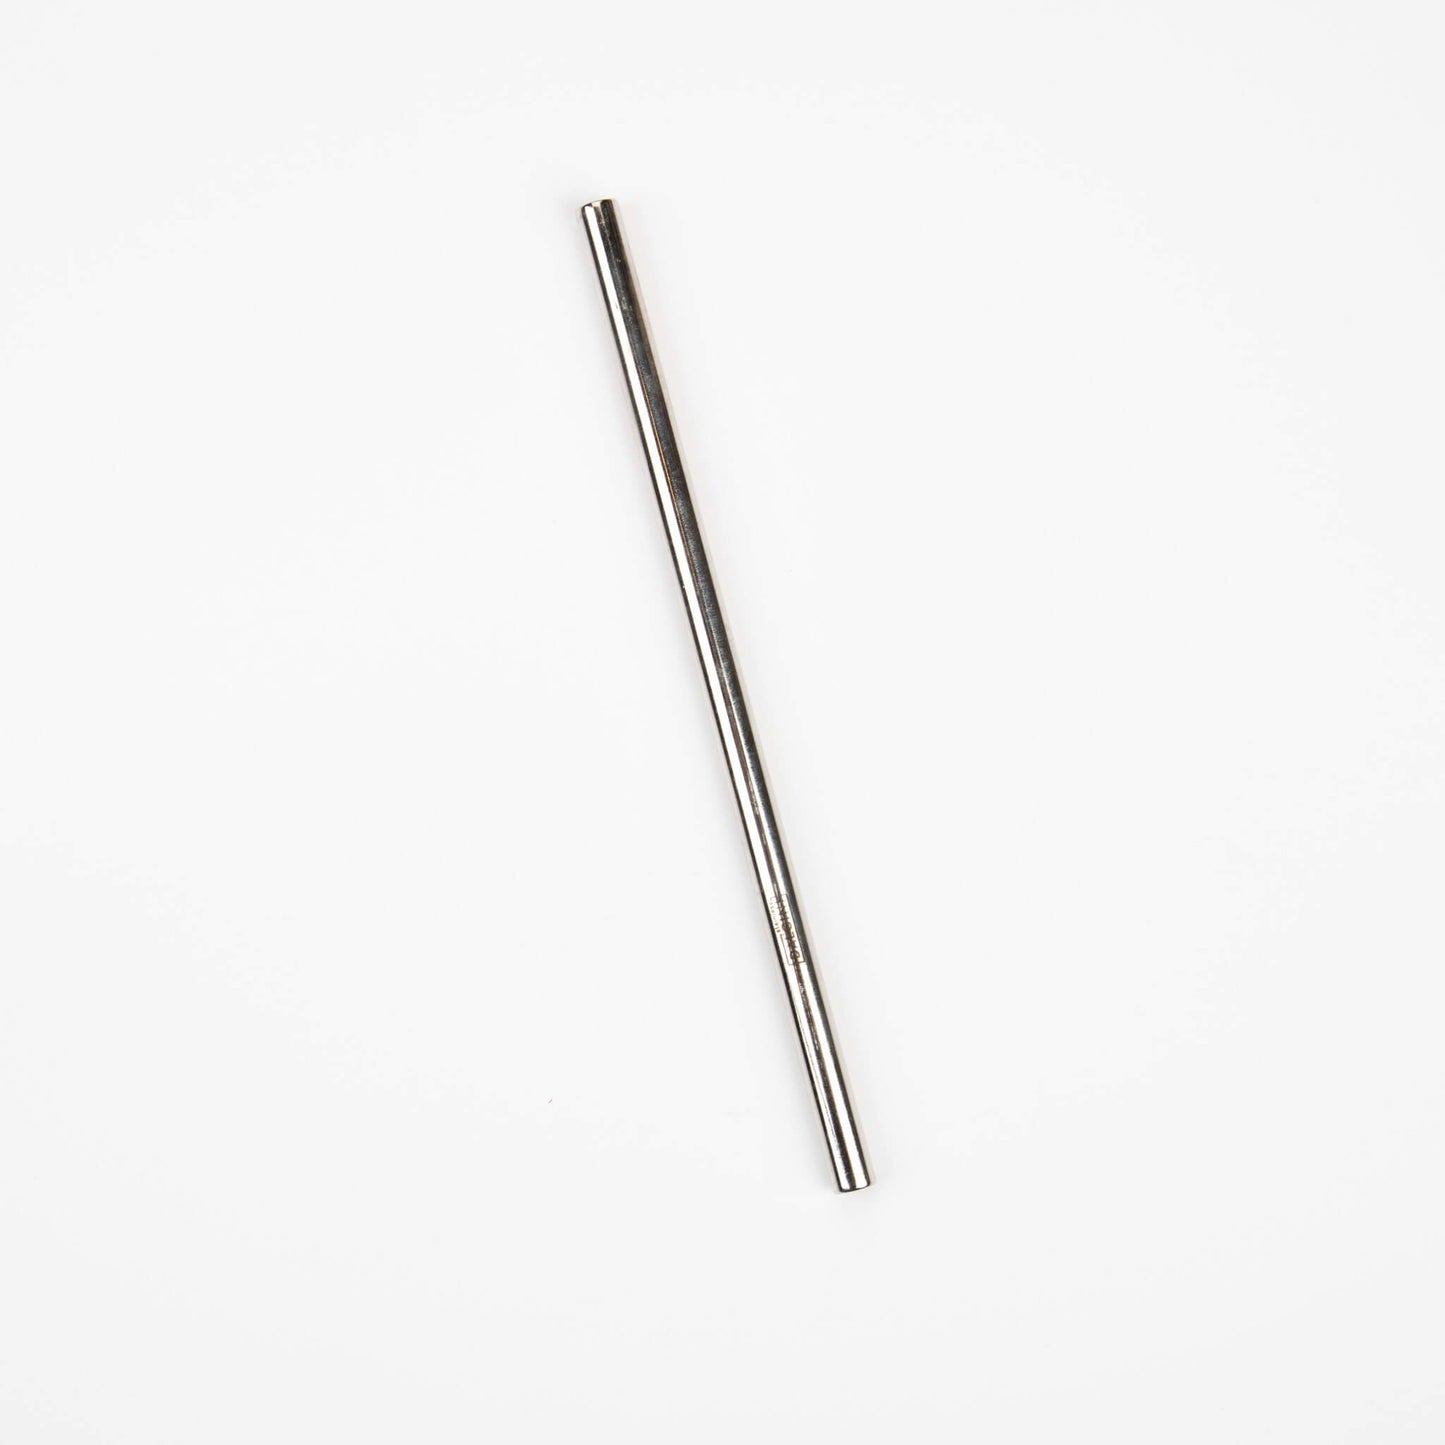 Reusable stainless steel straw